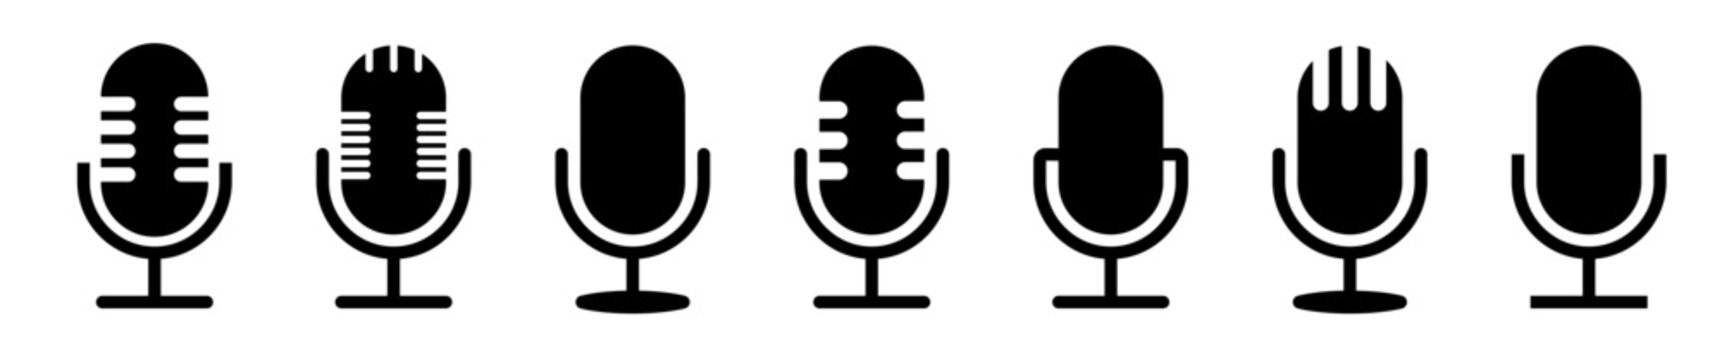 Microphone vector icon on white background. Microphone icon set. Different microphone. Vector illustration